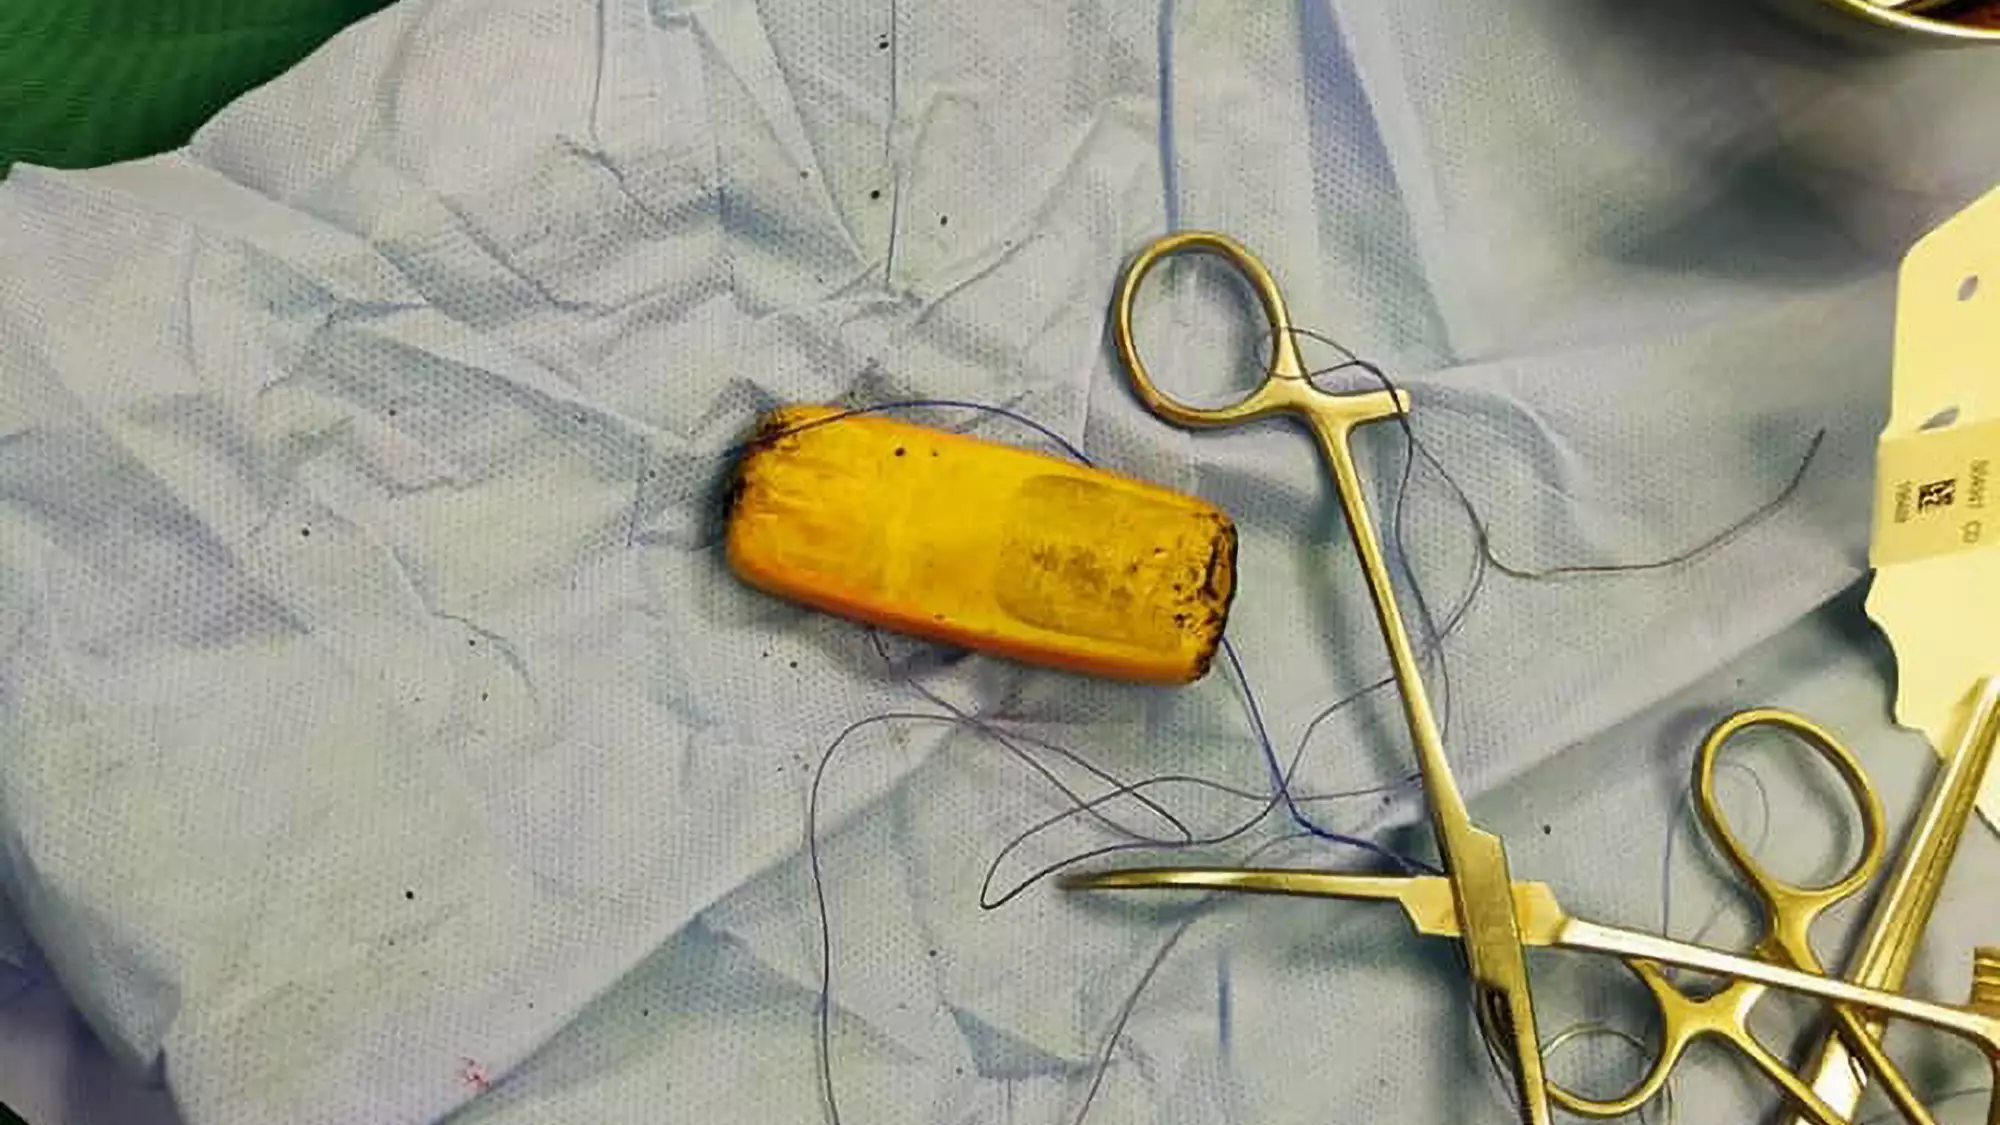 Man Lived With Phone In His Stomach For Half A Year